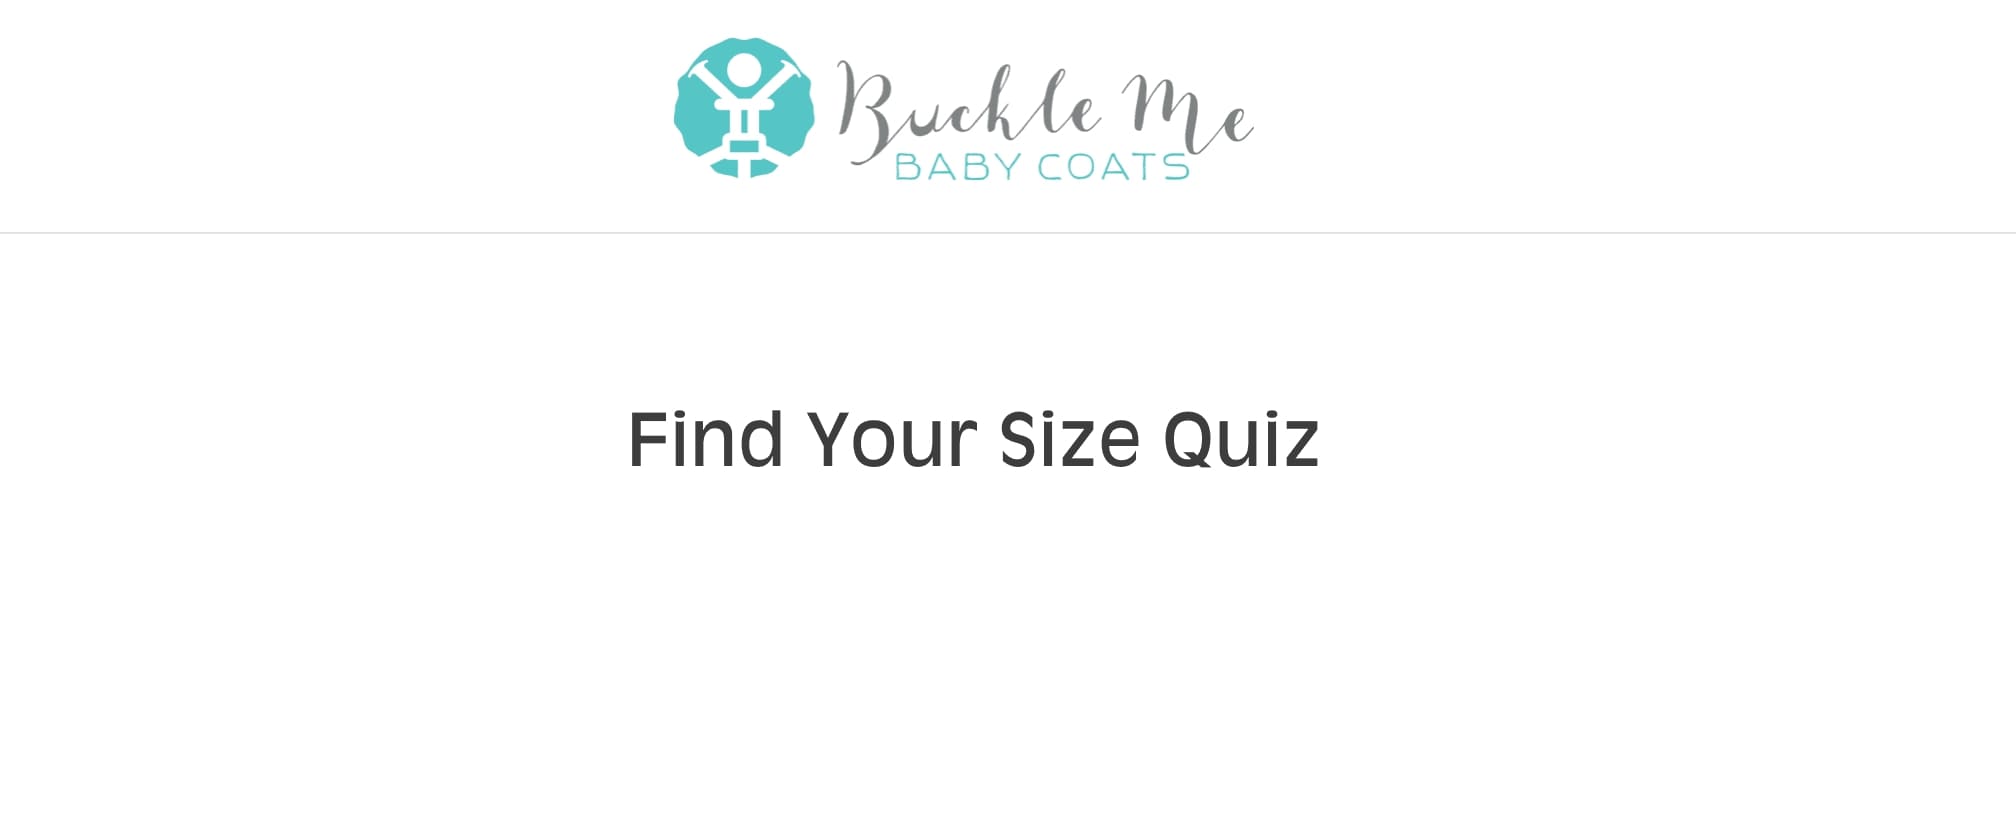 Apparel quiz - buckle me baby coats - find your size